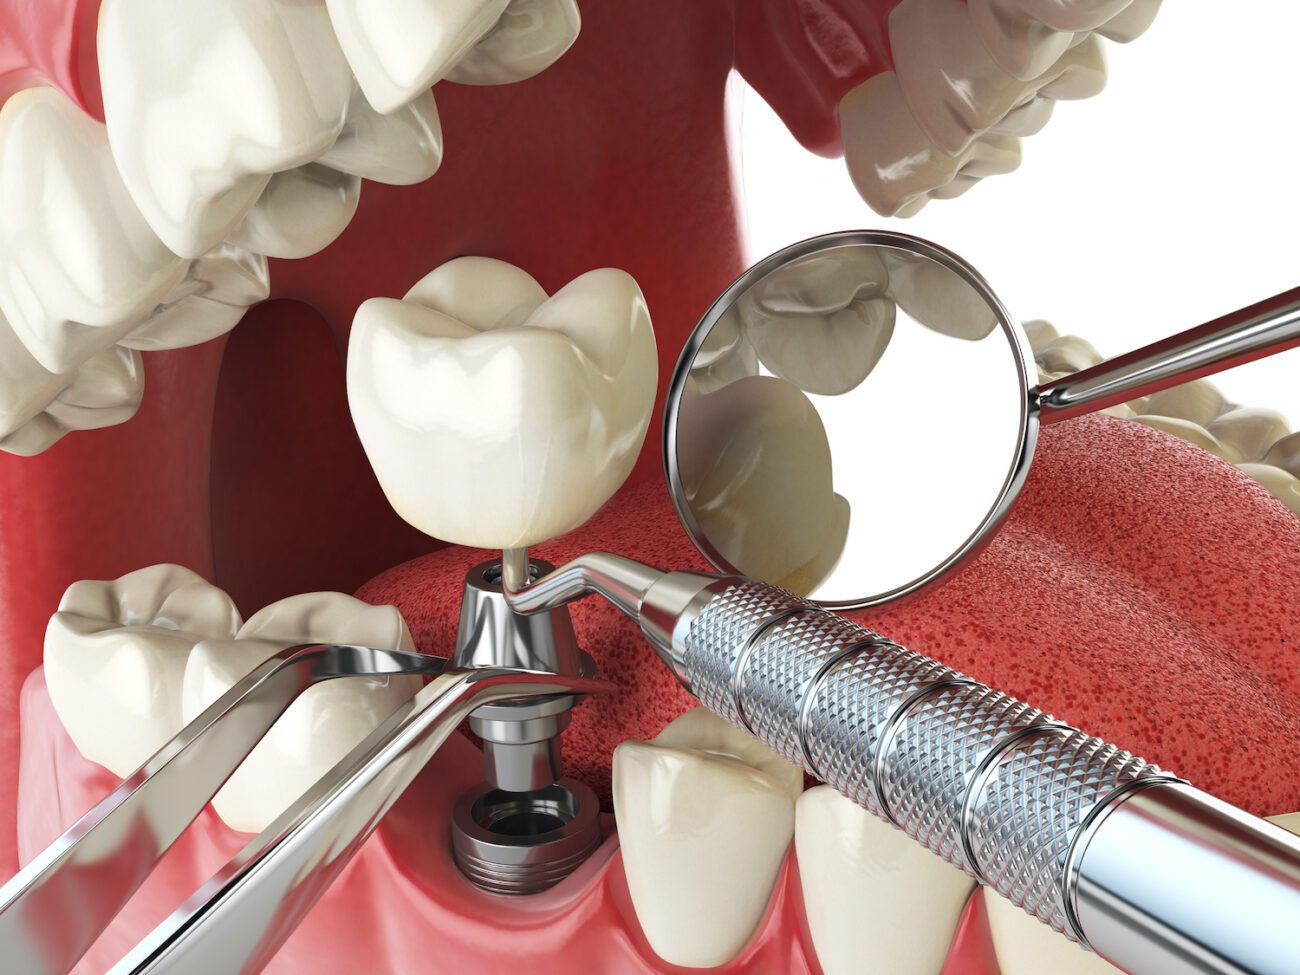 DENTAL IMPLANTS in PAYETTE ID are often recommended for patients with missing teeth